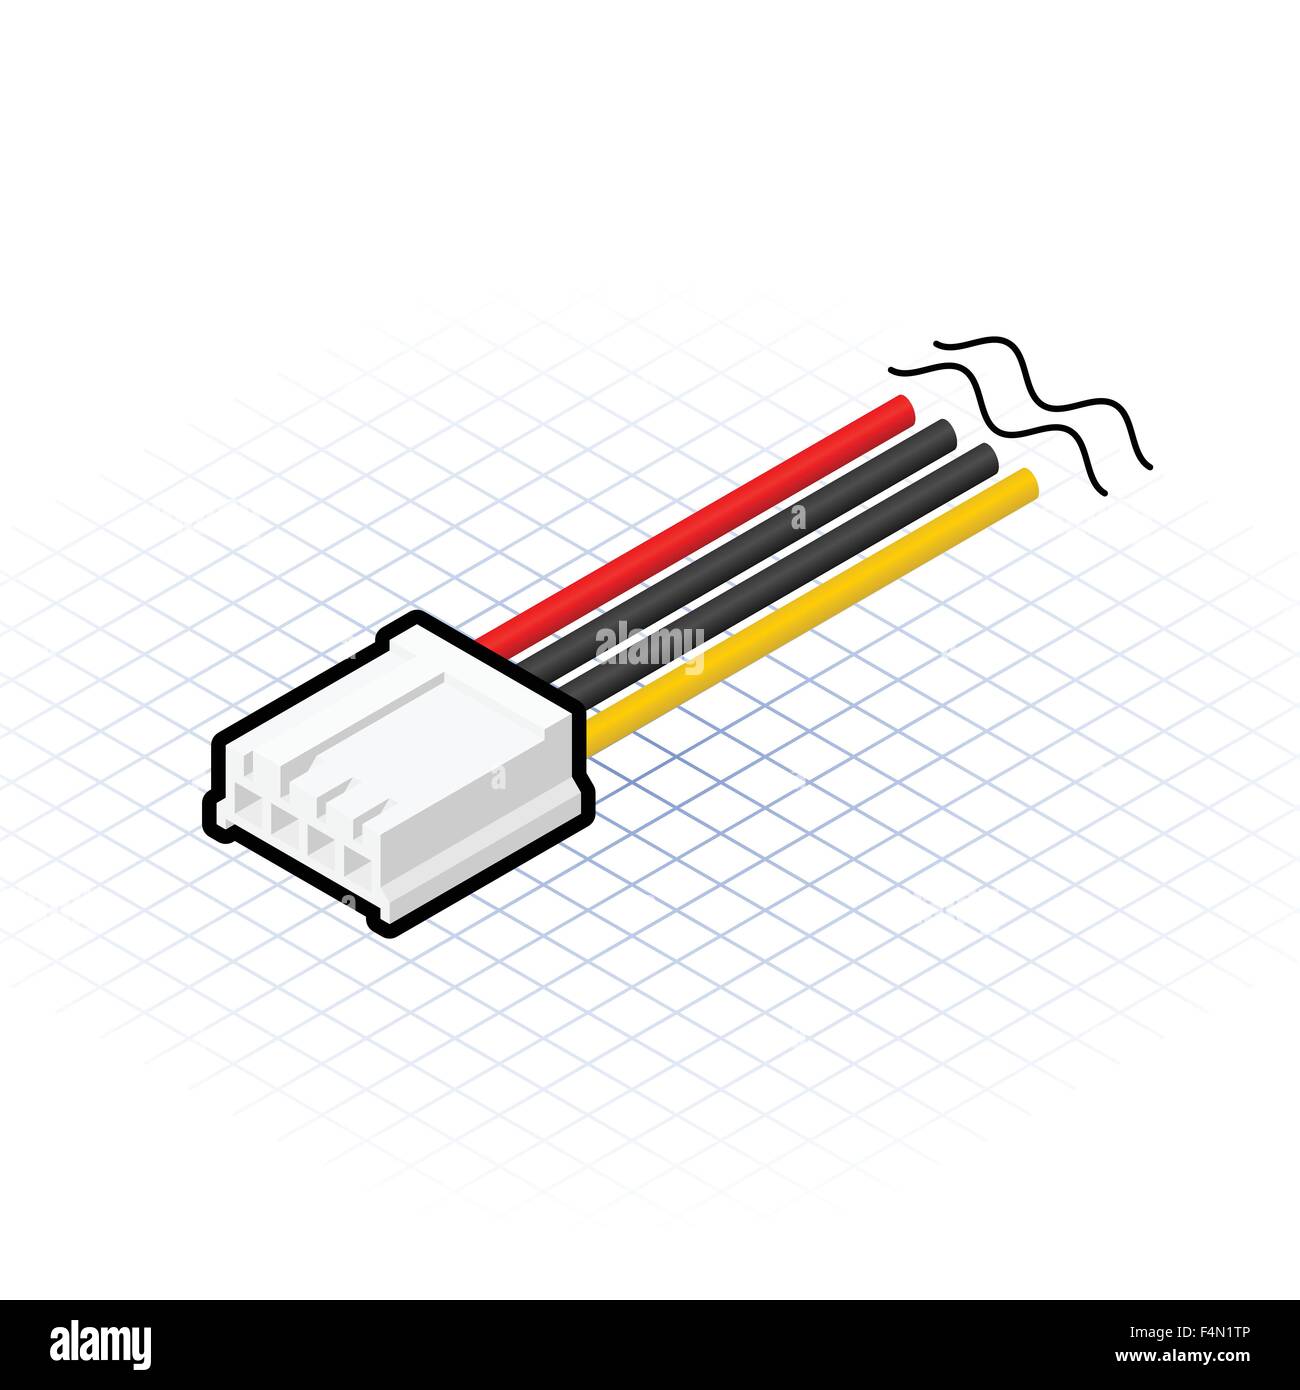 Isometric Four Pin Floppy Connector Vector Illustration Stock Vector